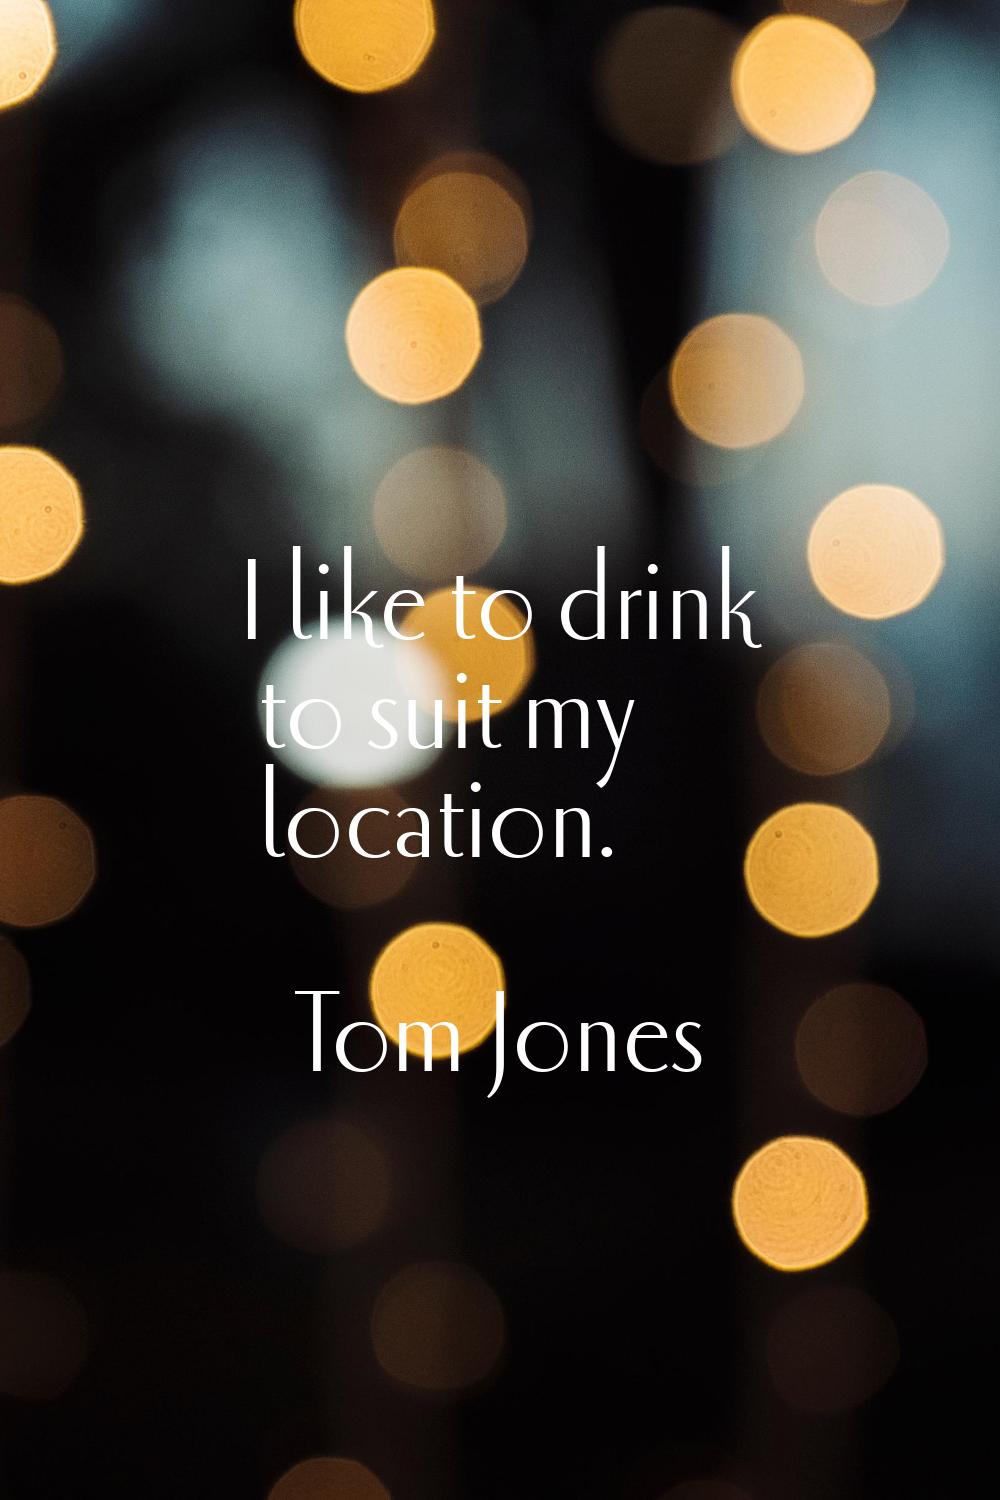 I like to drink to suit my location.